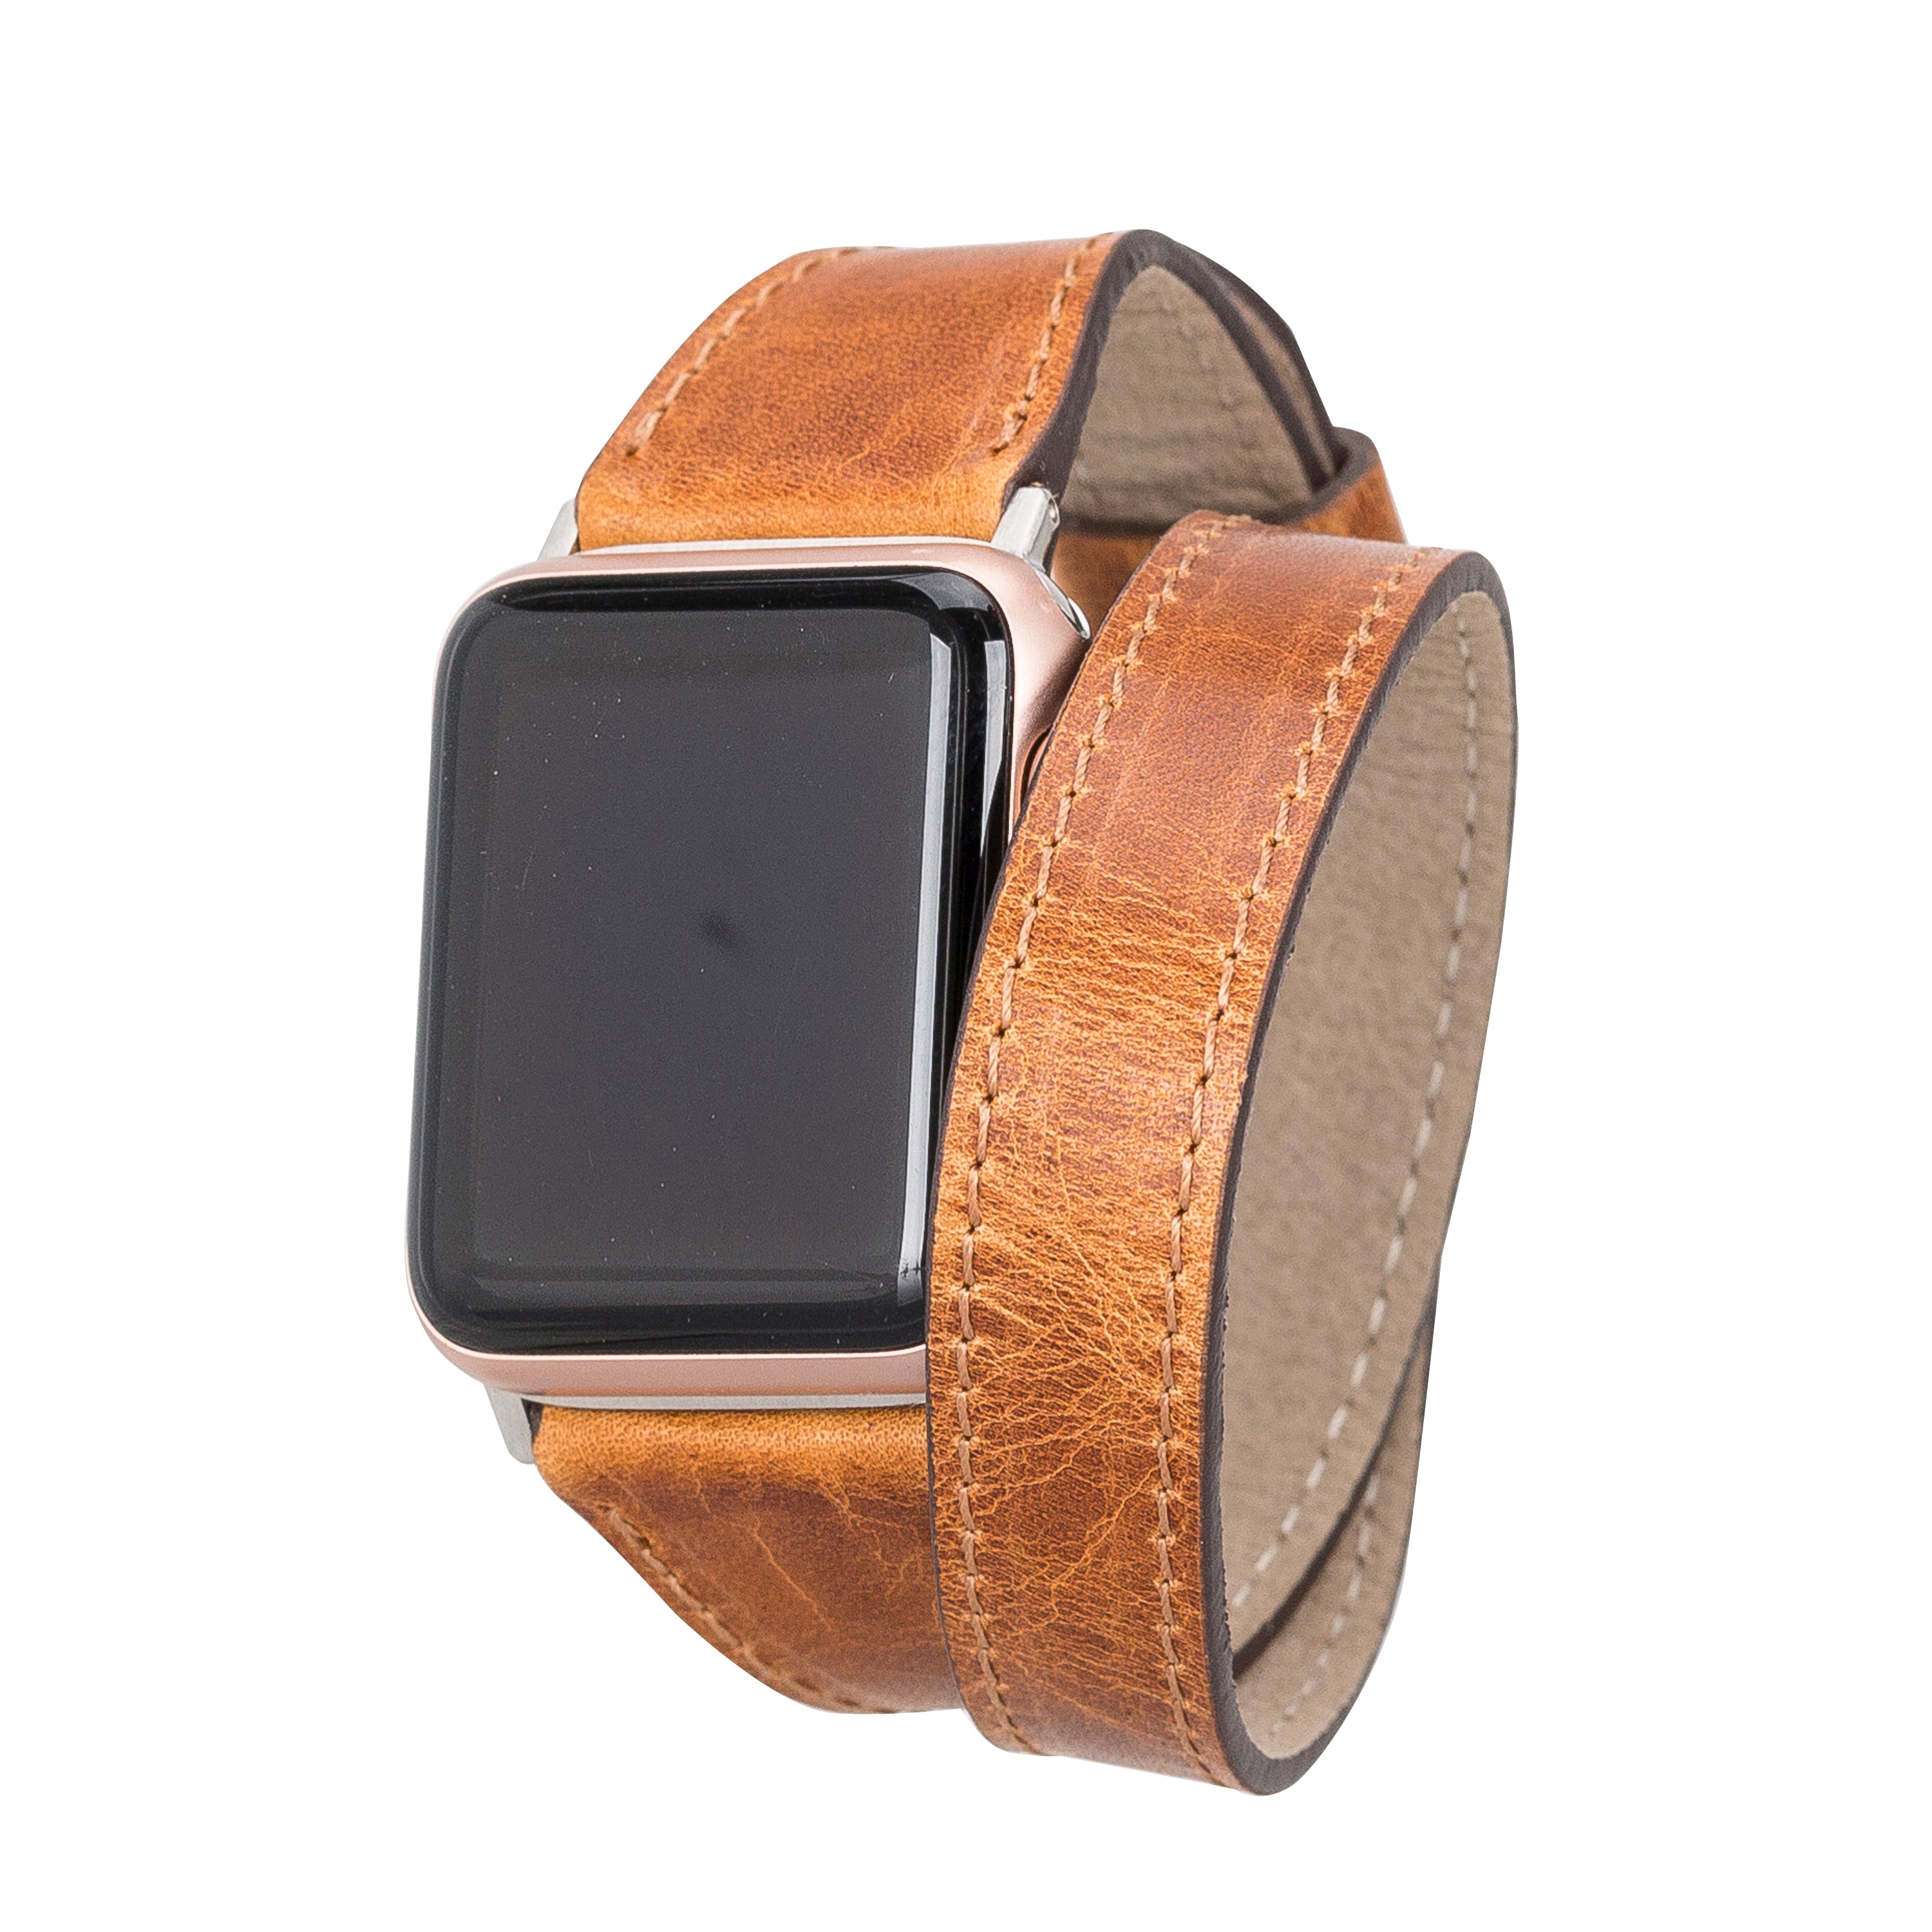 DelfiCase Oxford Double Leather Watch Band for Apple Watch 1